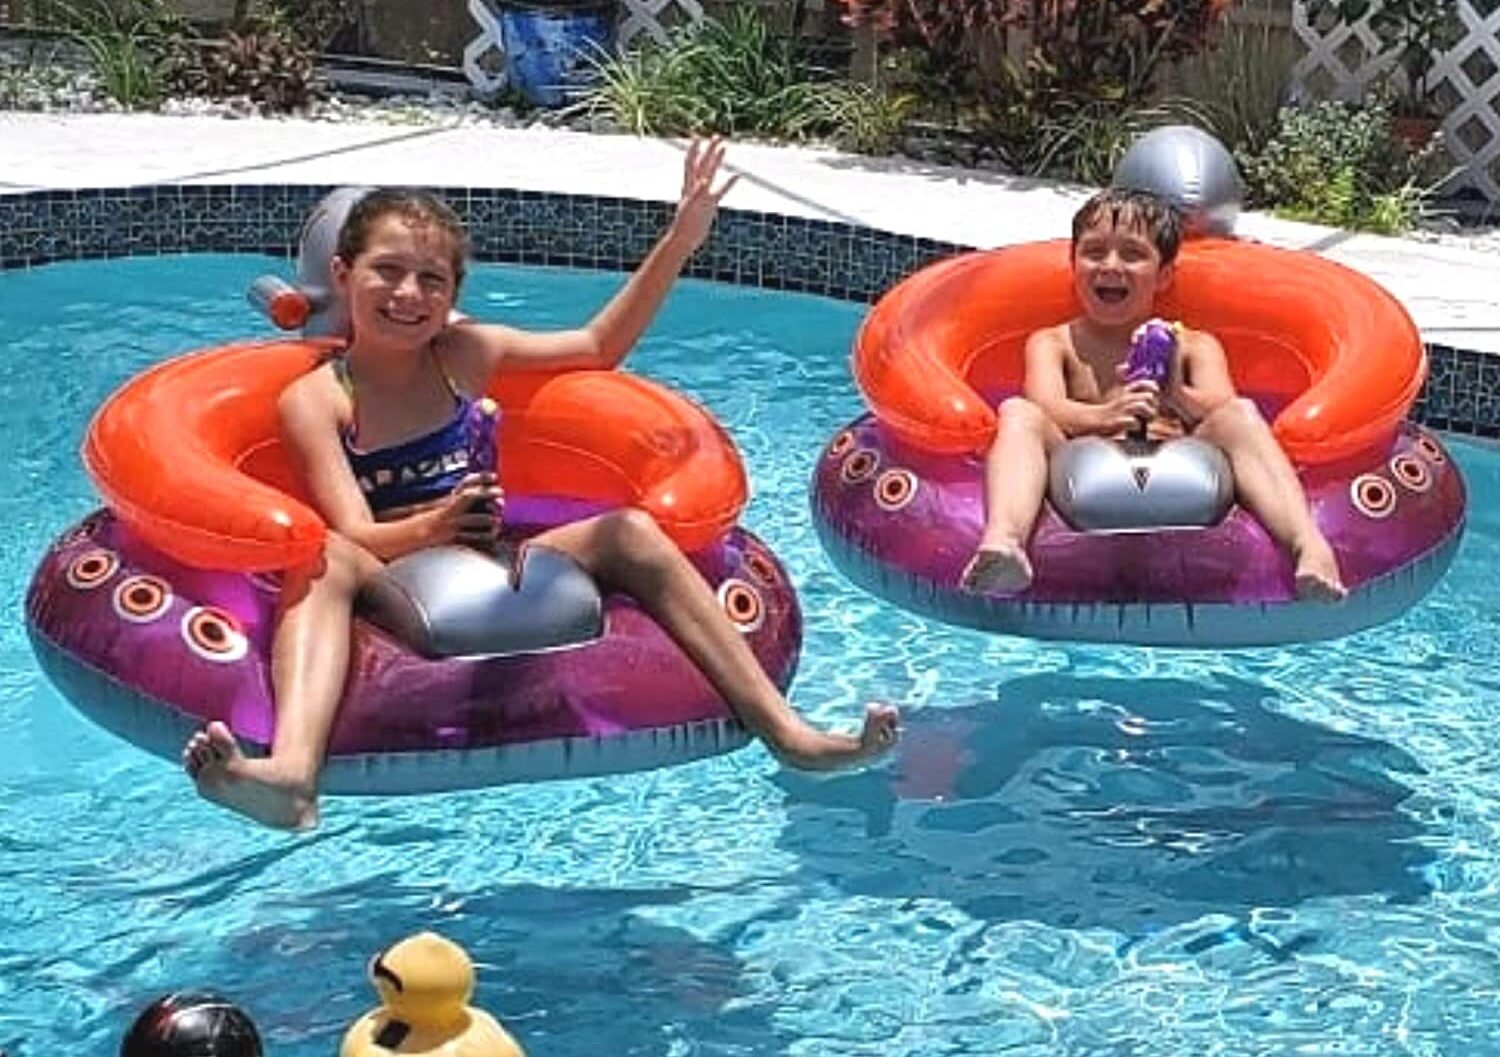 inflatable ufo spaceship pool float ride on kids playing in pool